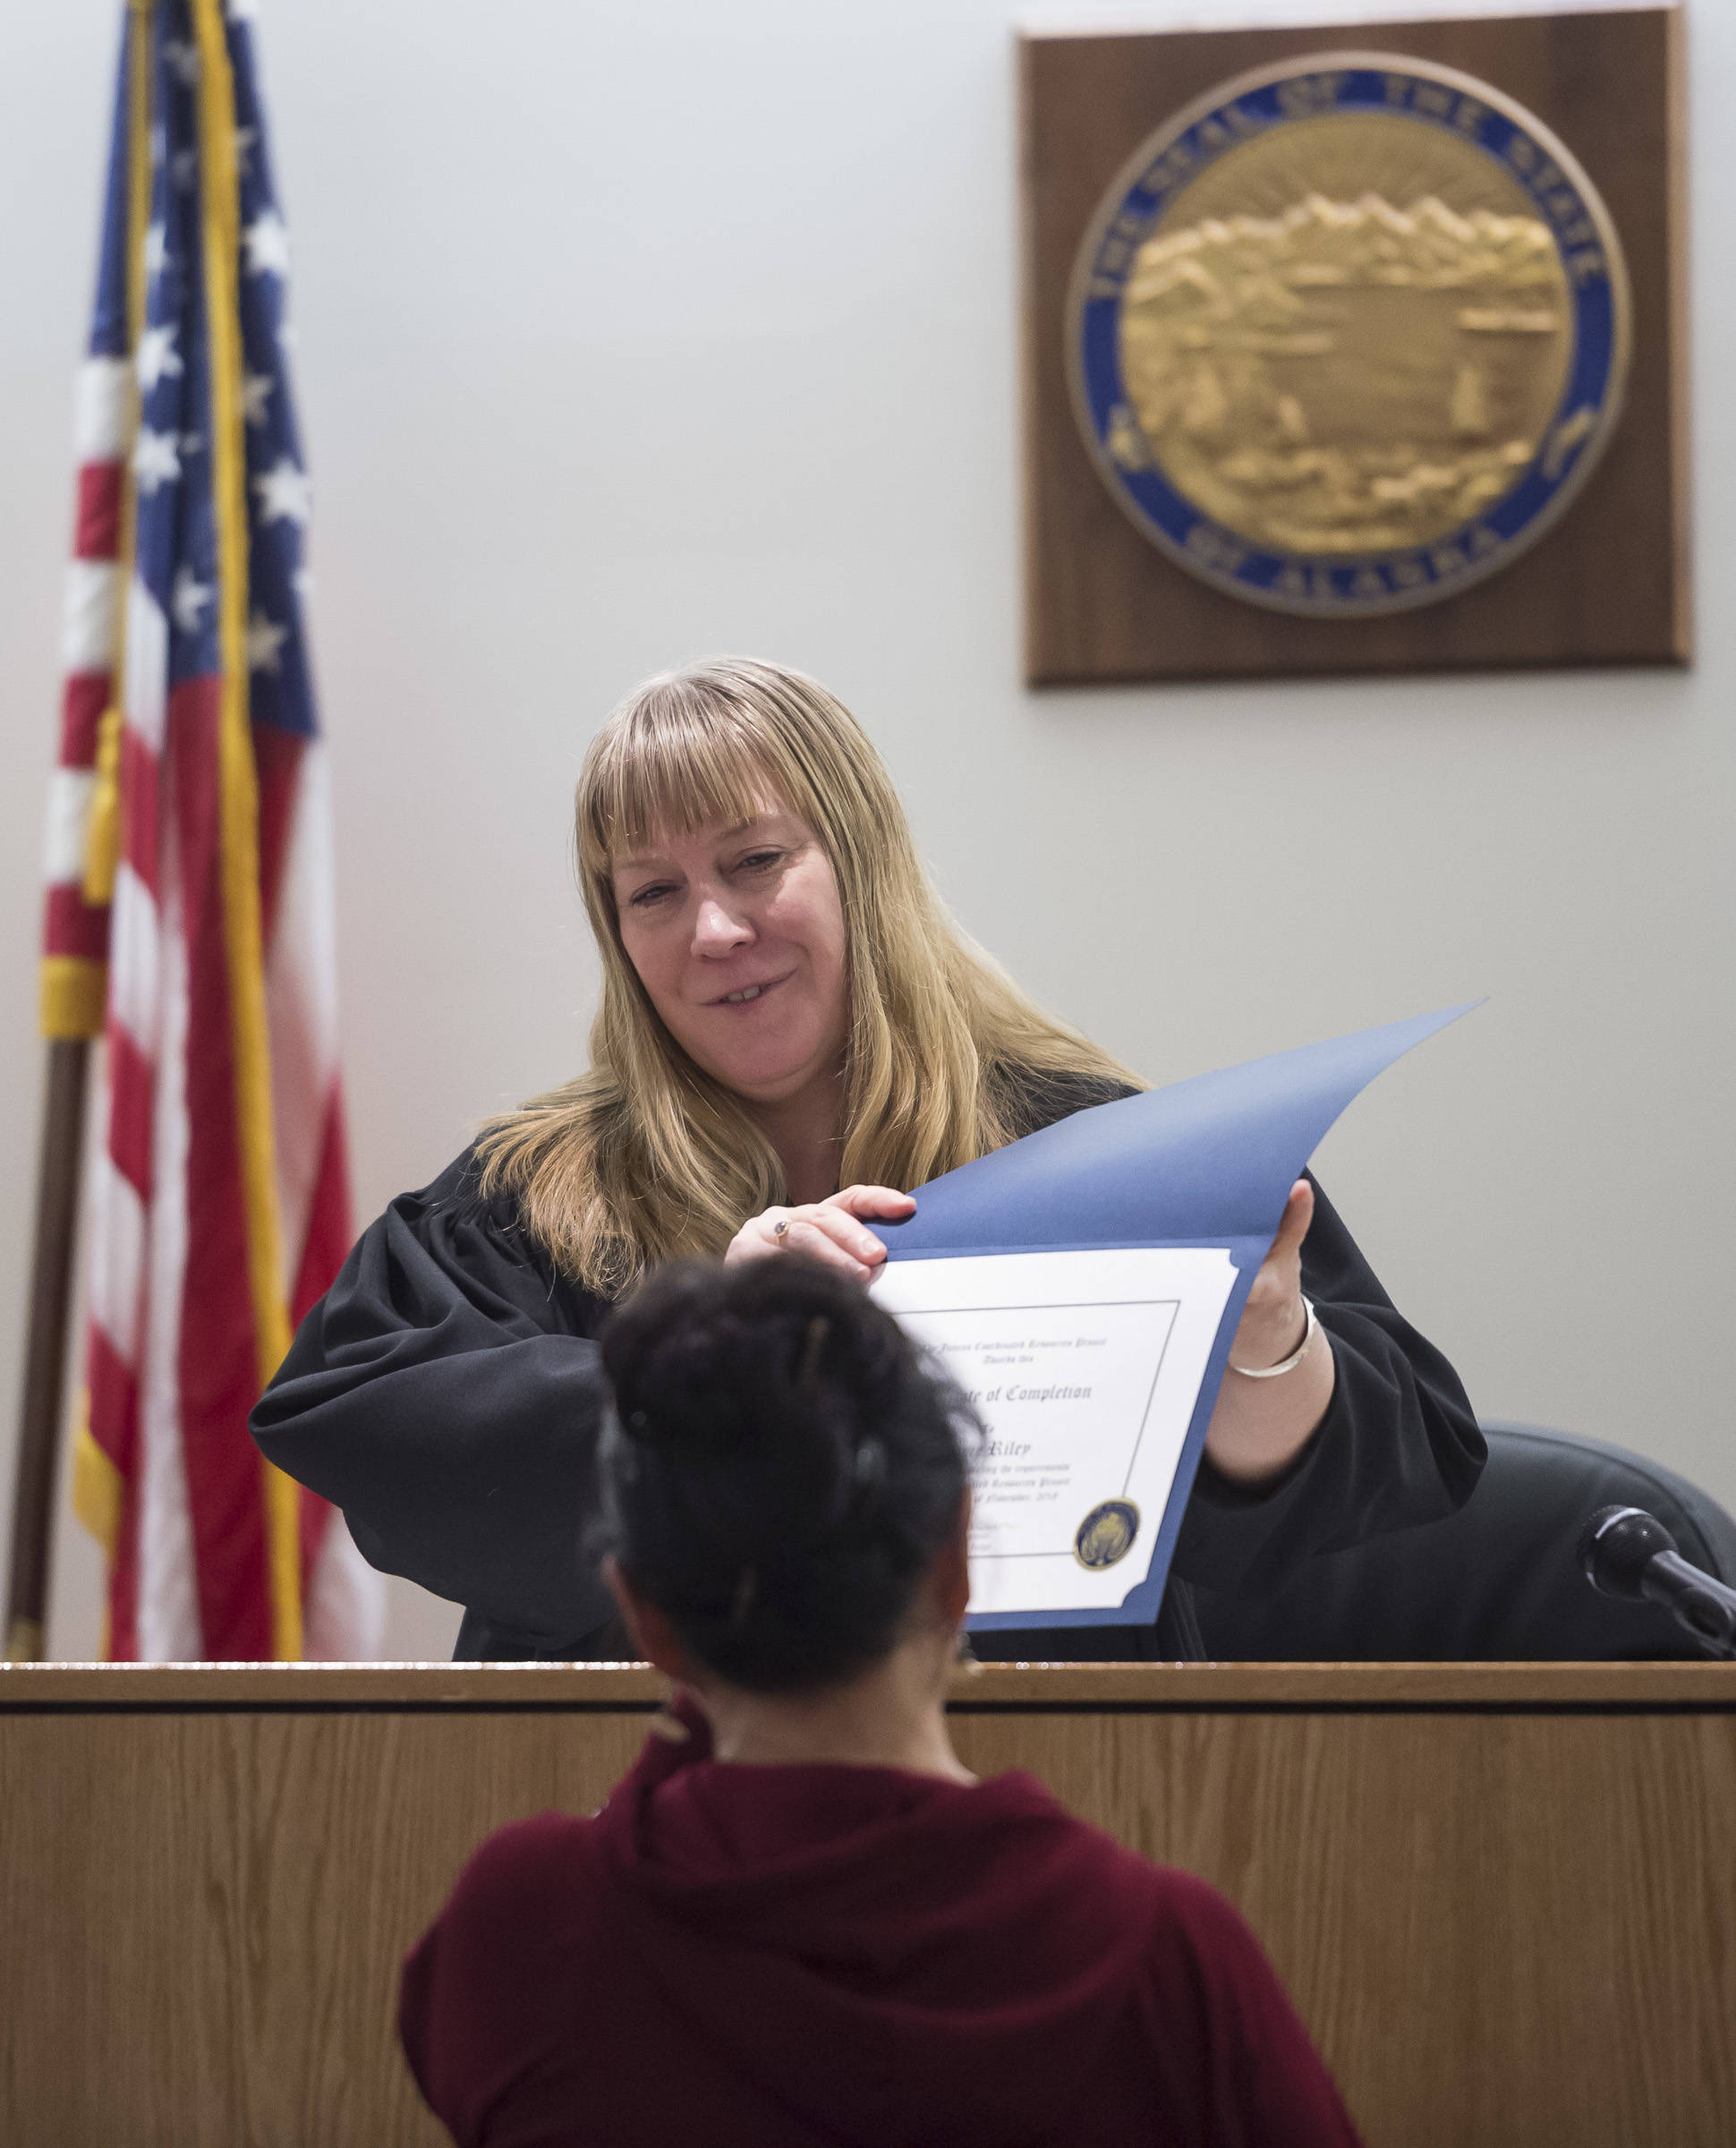 Juneau District Court Judge Kirsten Swanson presents Marie Riley, a recovering alcoholic, with a Certificate of Completion after graduating from Juneau’s Therapeutic Court on Thursday, Nov. 15, 2018. (Michael Penn | Juneau Empire)